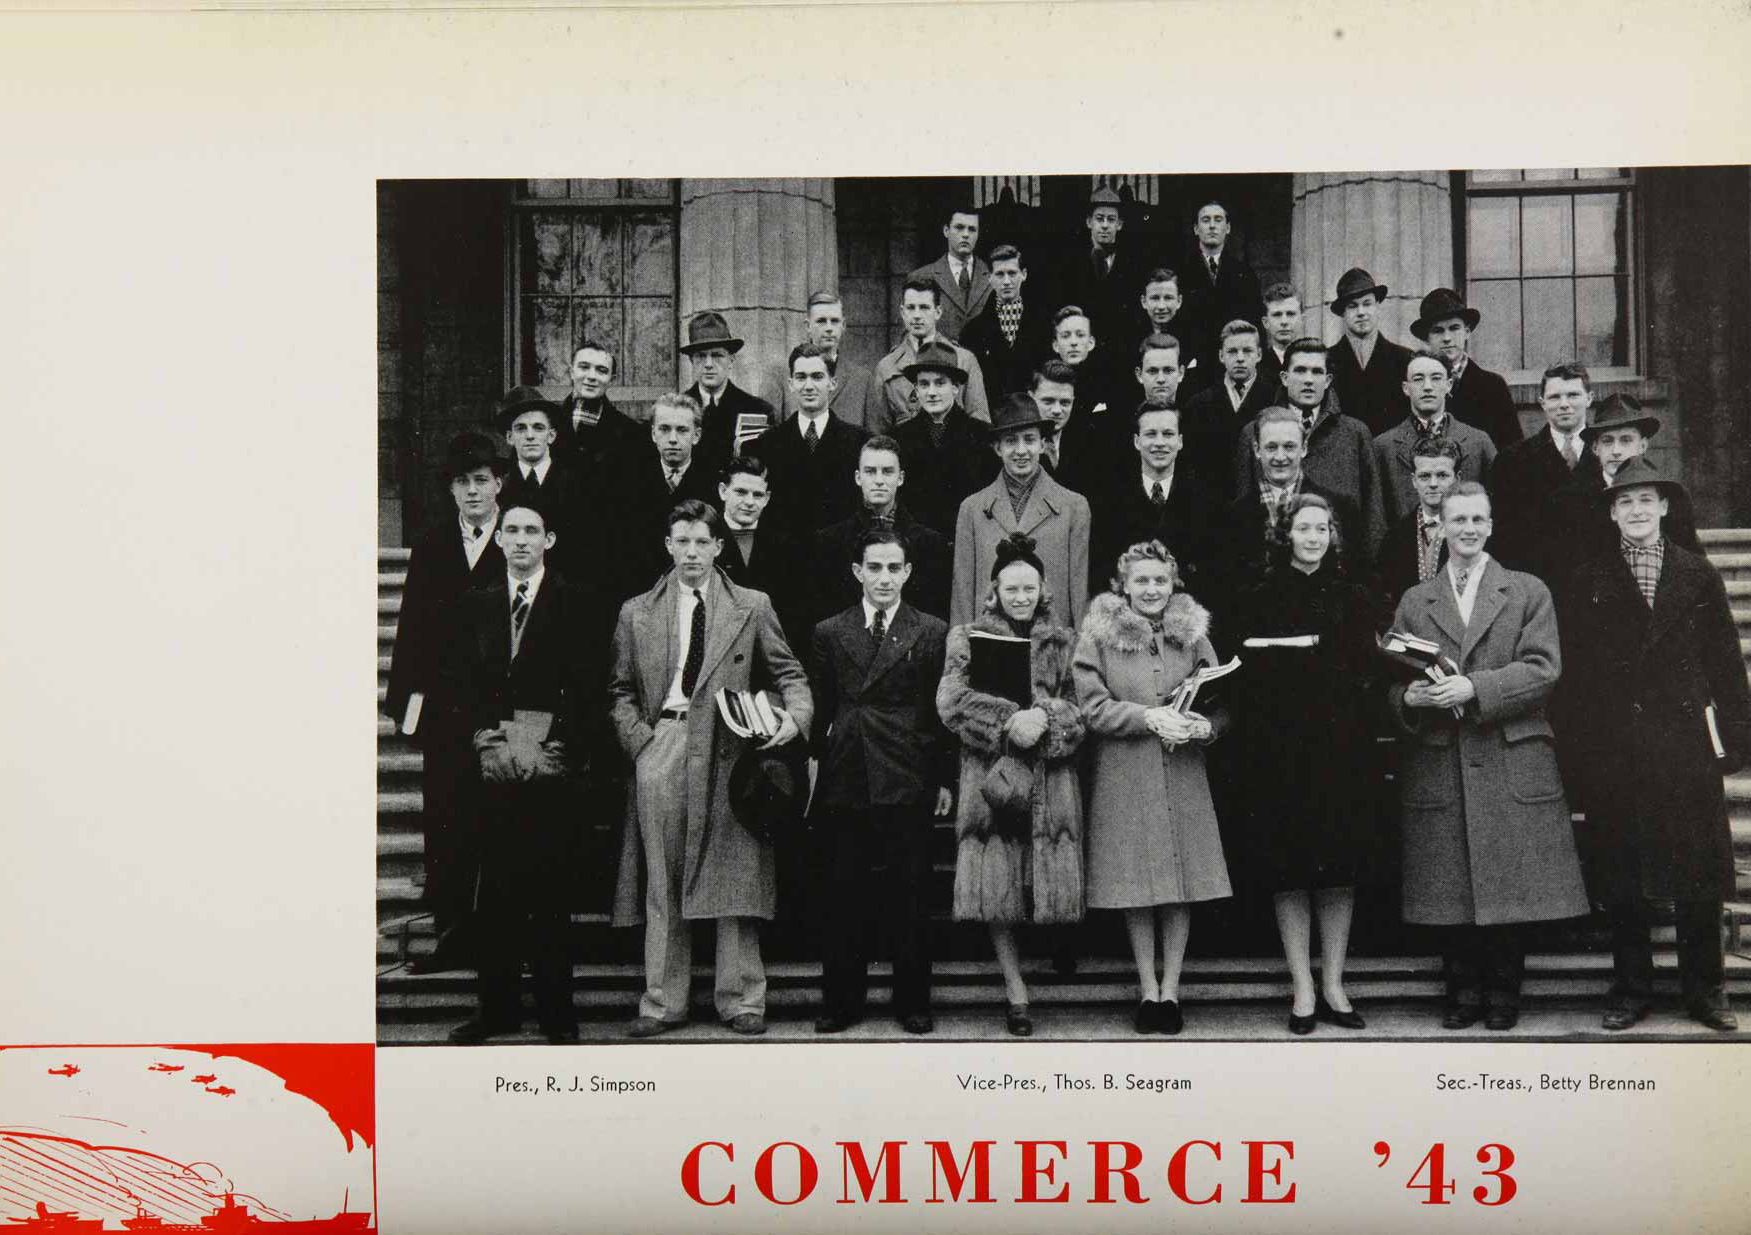 McGill Yearbook: 1940